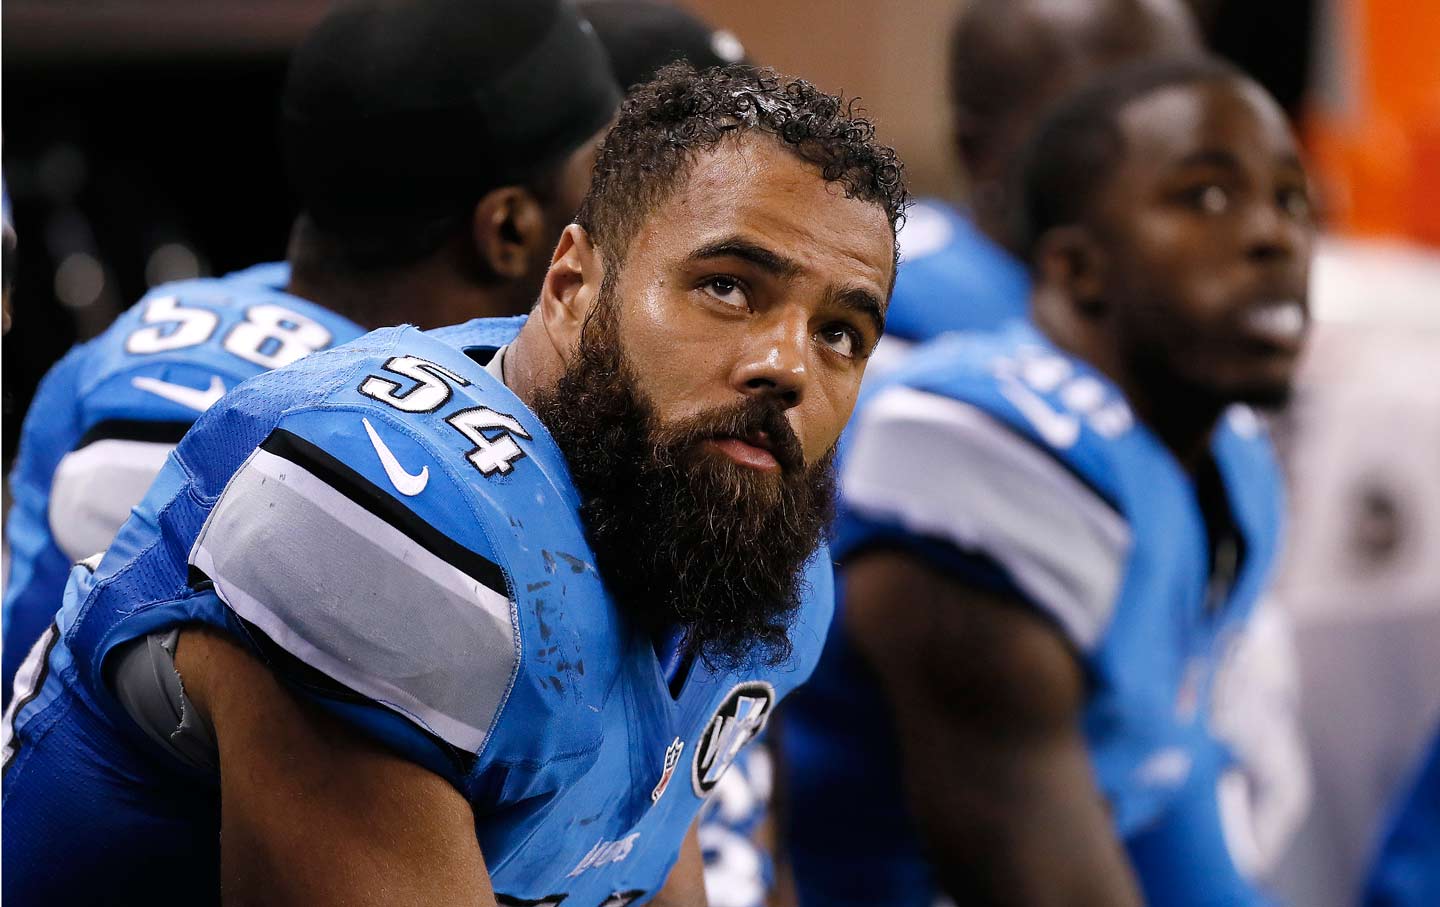 DeAndre Levy on the bench